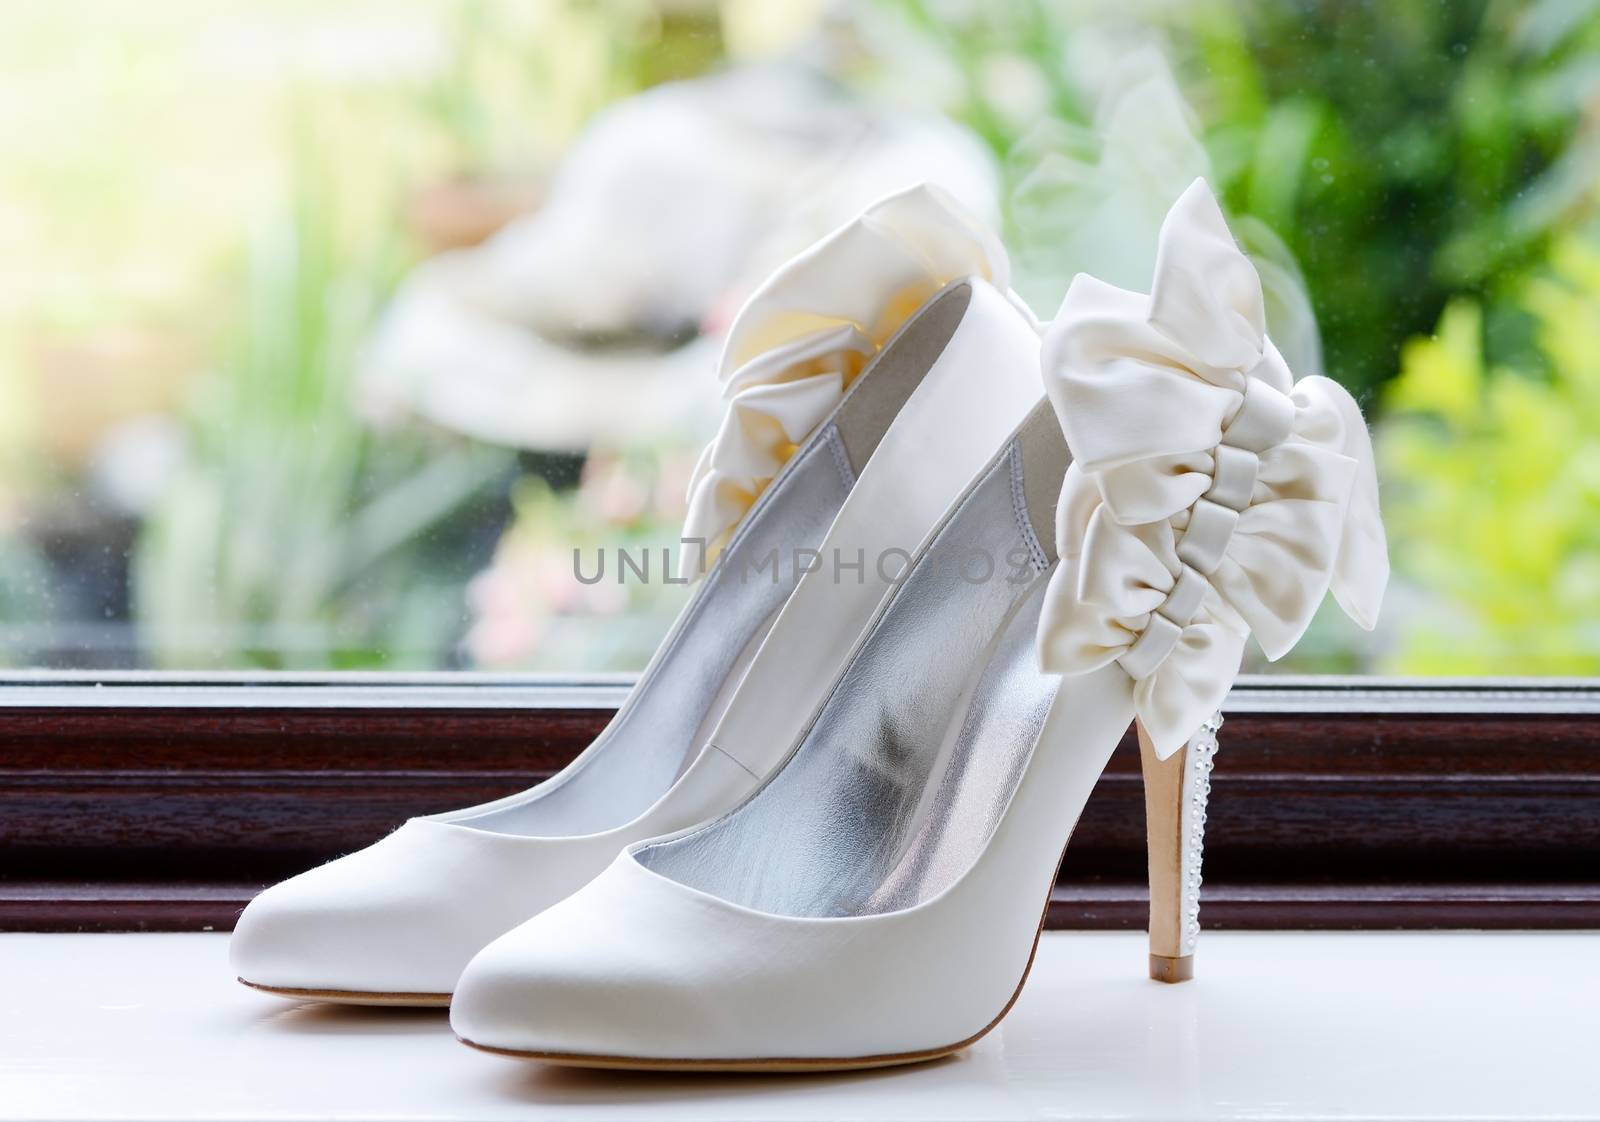 Brides shoes closeup on wedding day by a window